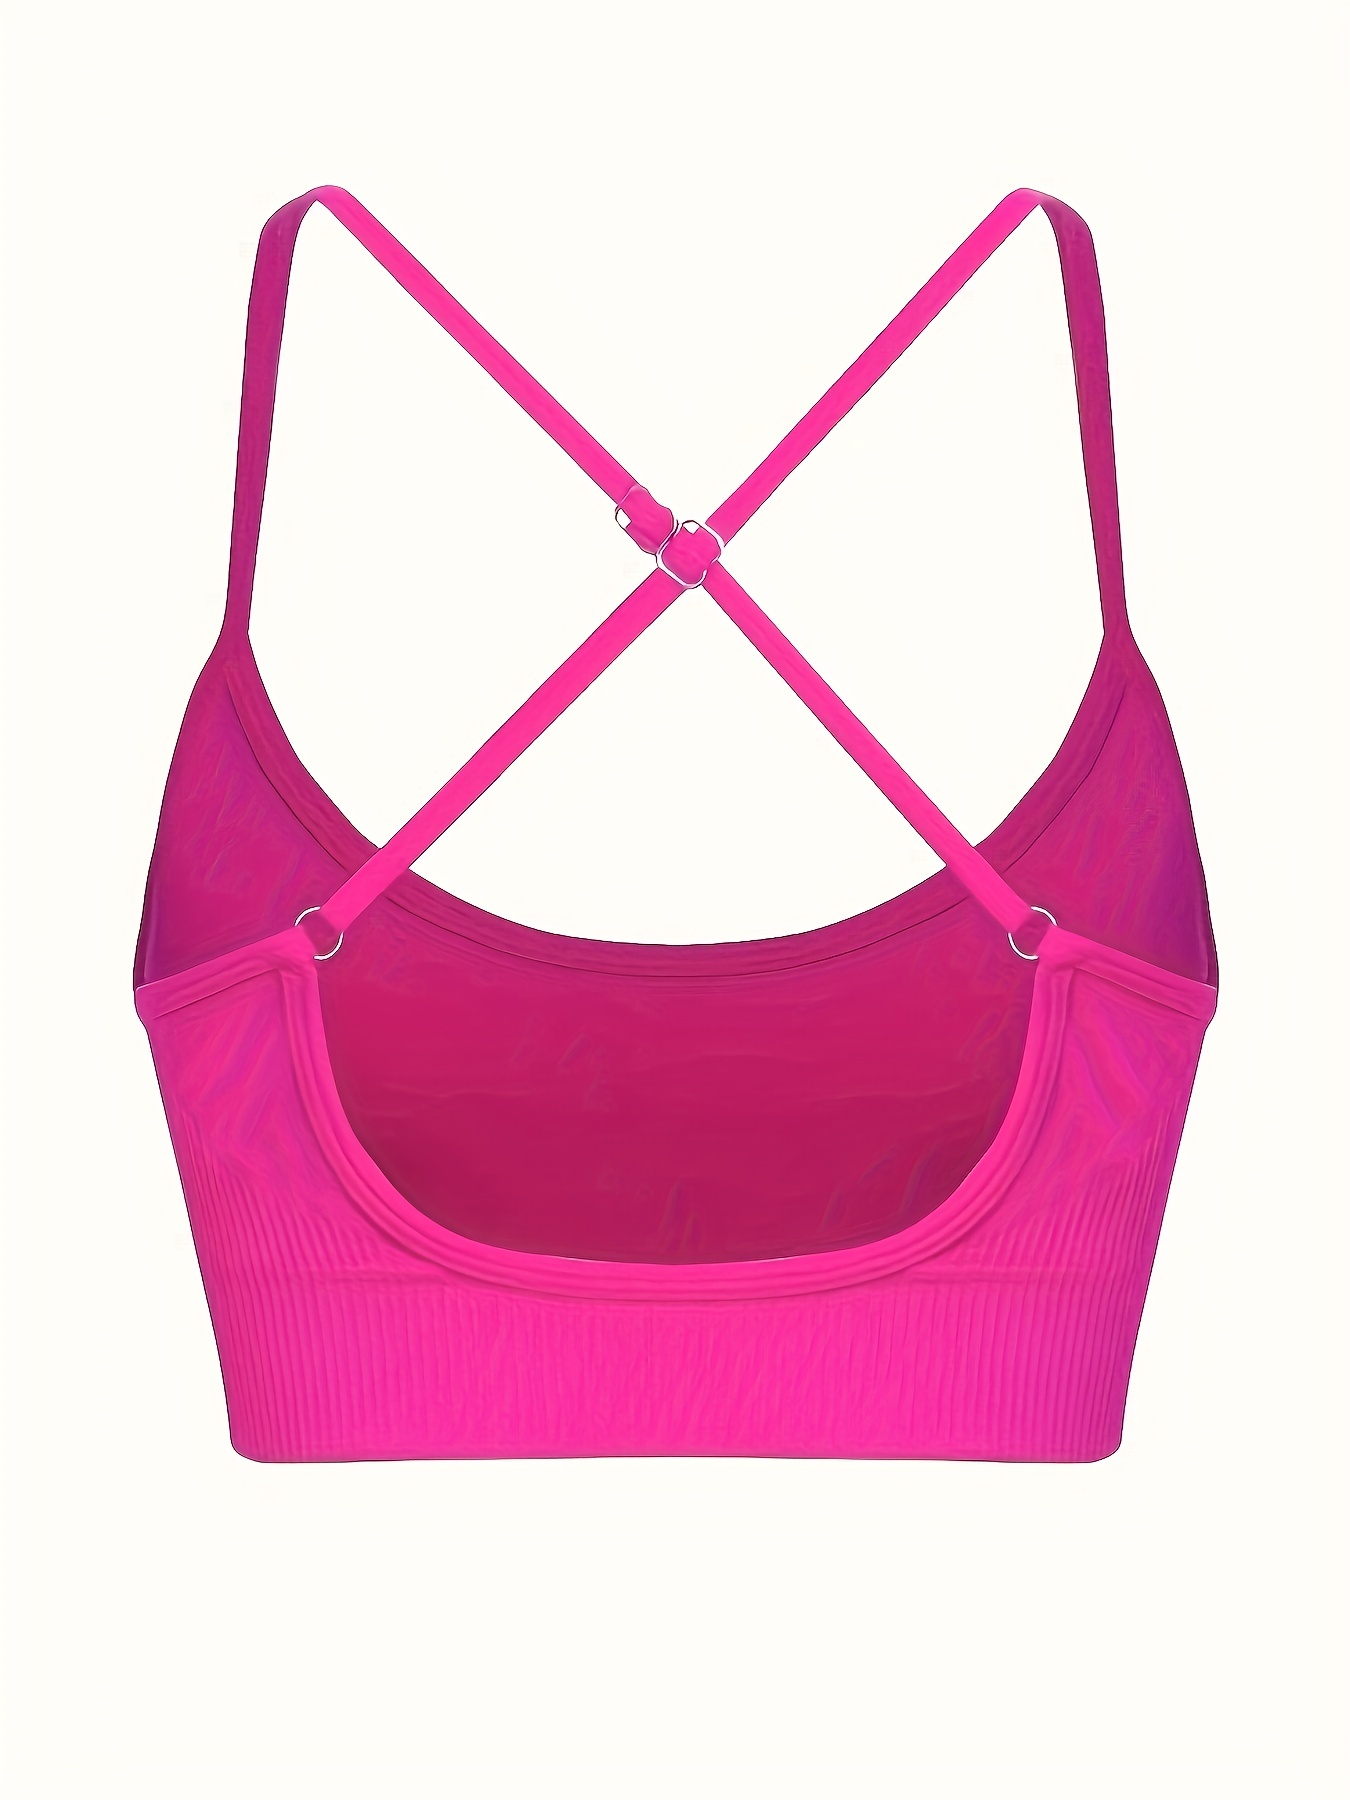 Buy SCOOPLOVER Sexy Racerback Sports Bras for Women, V-Neck Low Impact  Padded Breathable Sports Bras Yoga Bras, Pink, Large at